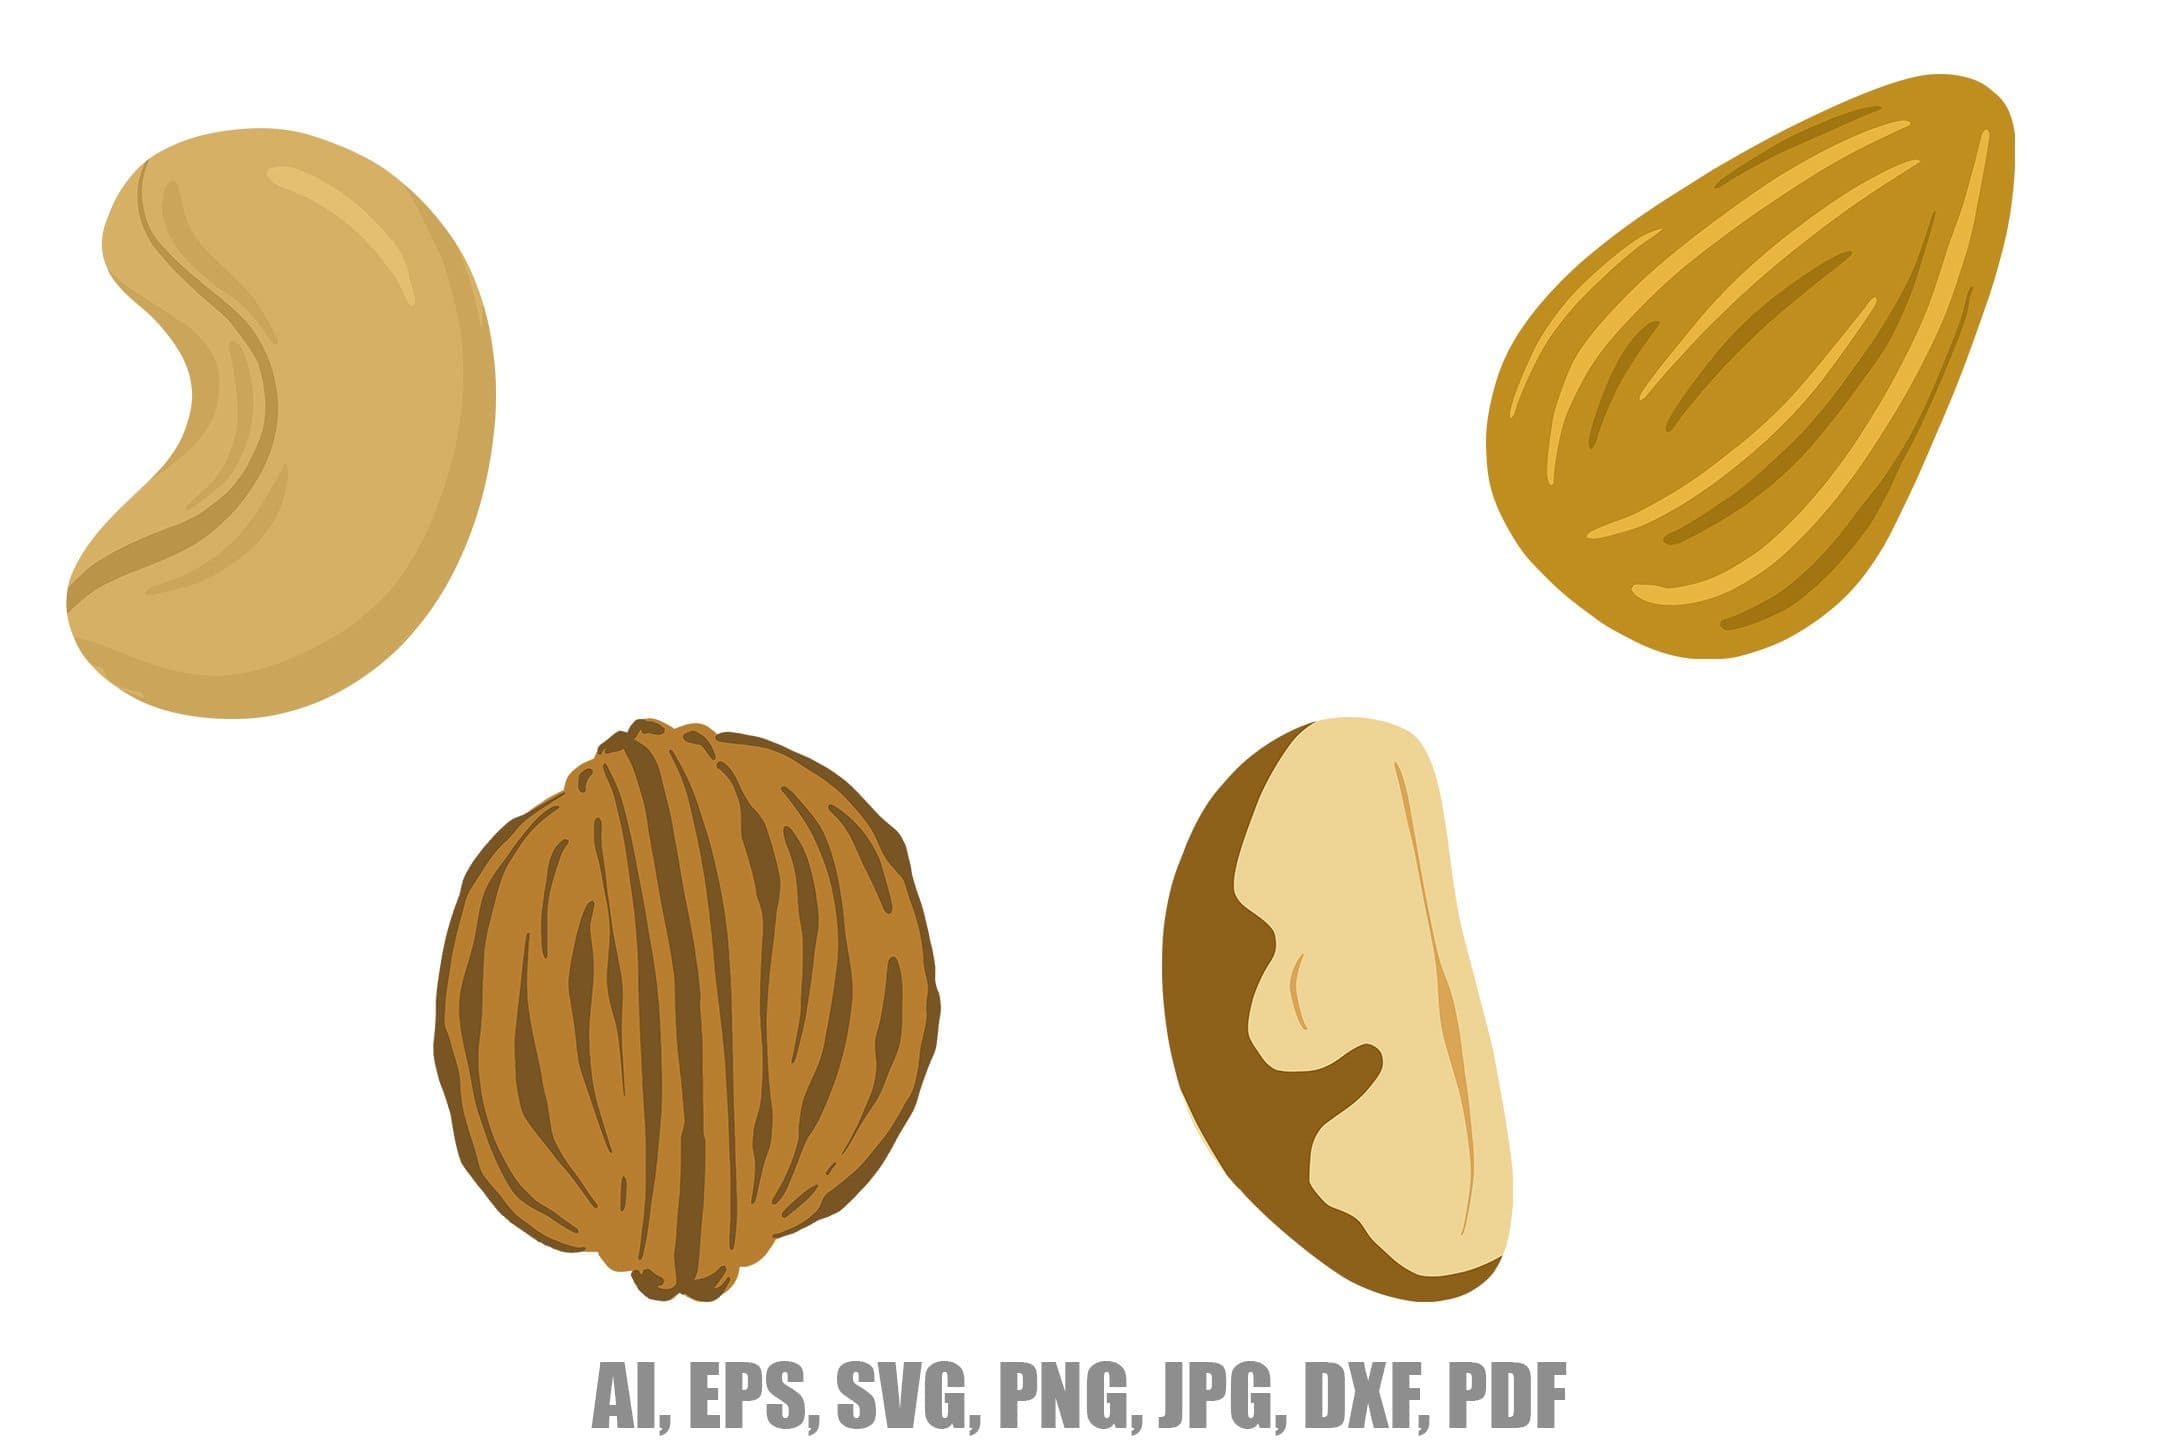 Collection of illustrations of nuts: cashew, walnut, Brazil nut, pecan.